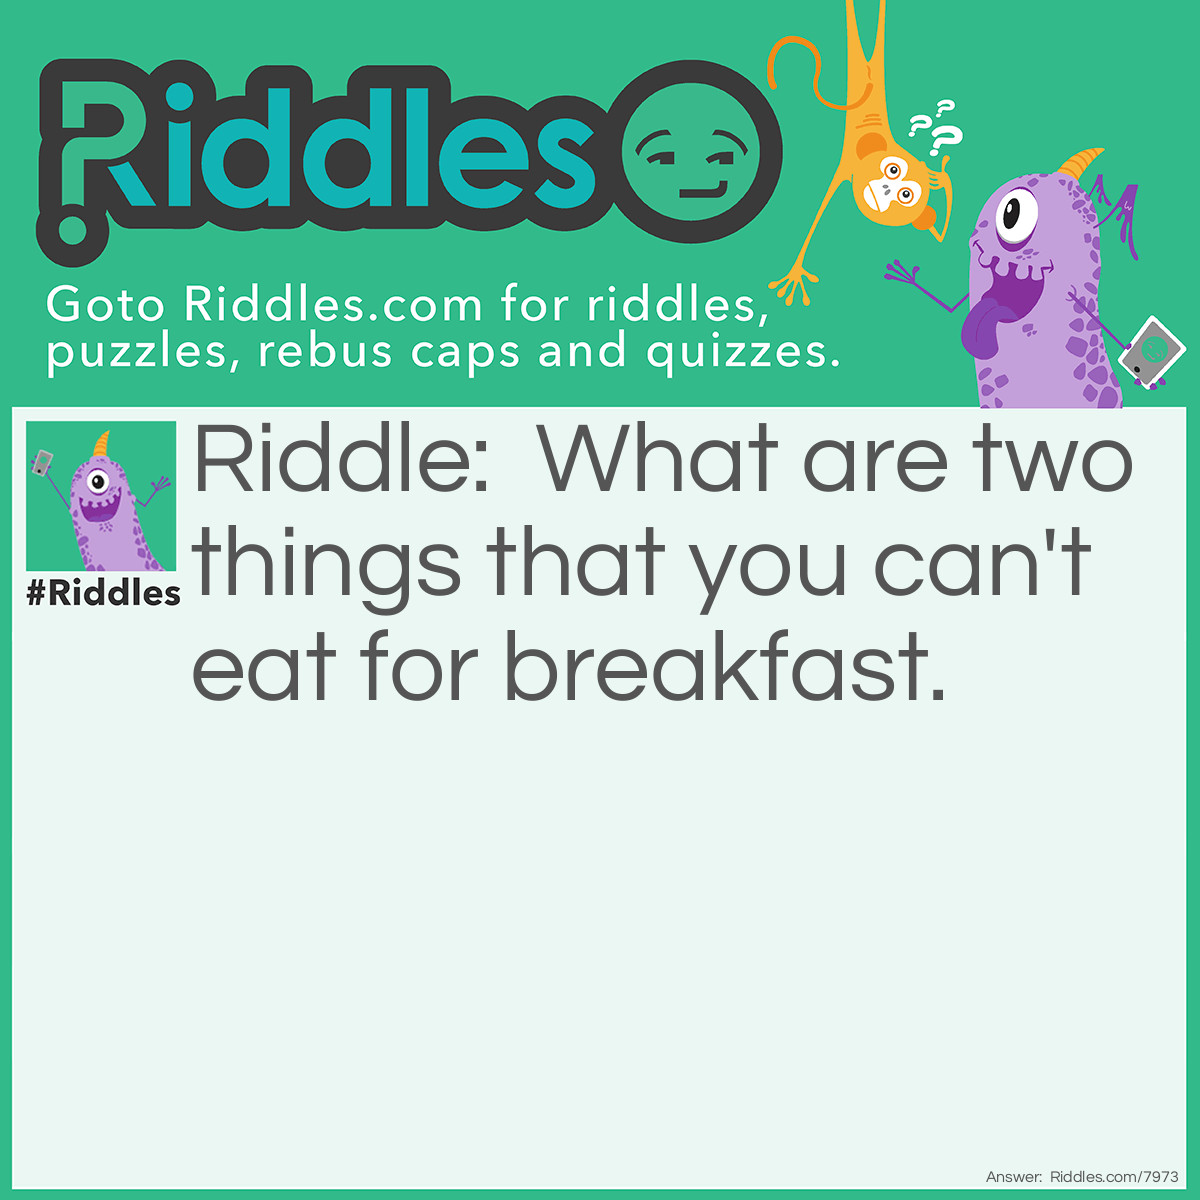 Riddle: What are two things that you can't eat for breakfast. Answer: Lunch and dinner.